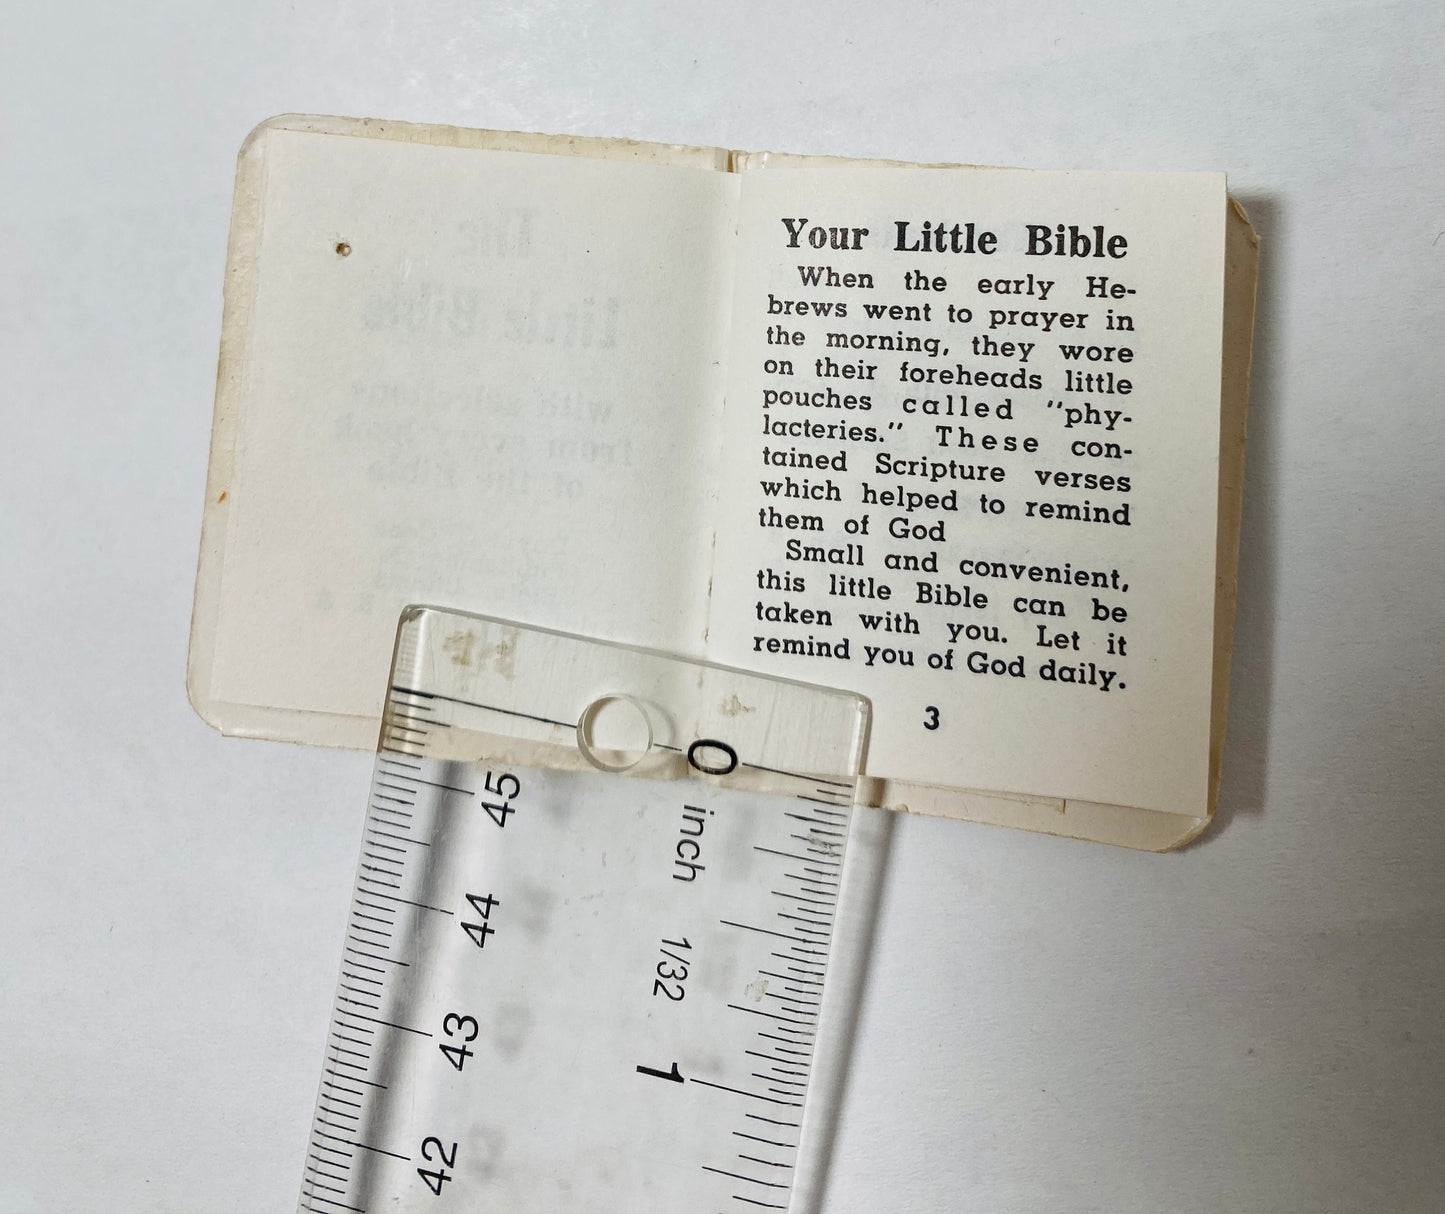 1970 vintage miniature bible the Little Bible with selections from every book of the Bible published in US by David Cook 2" x 1.75"